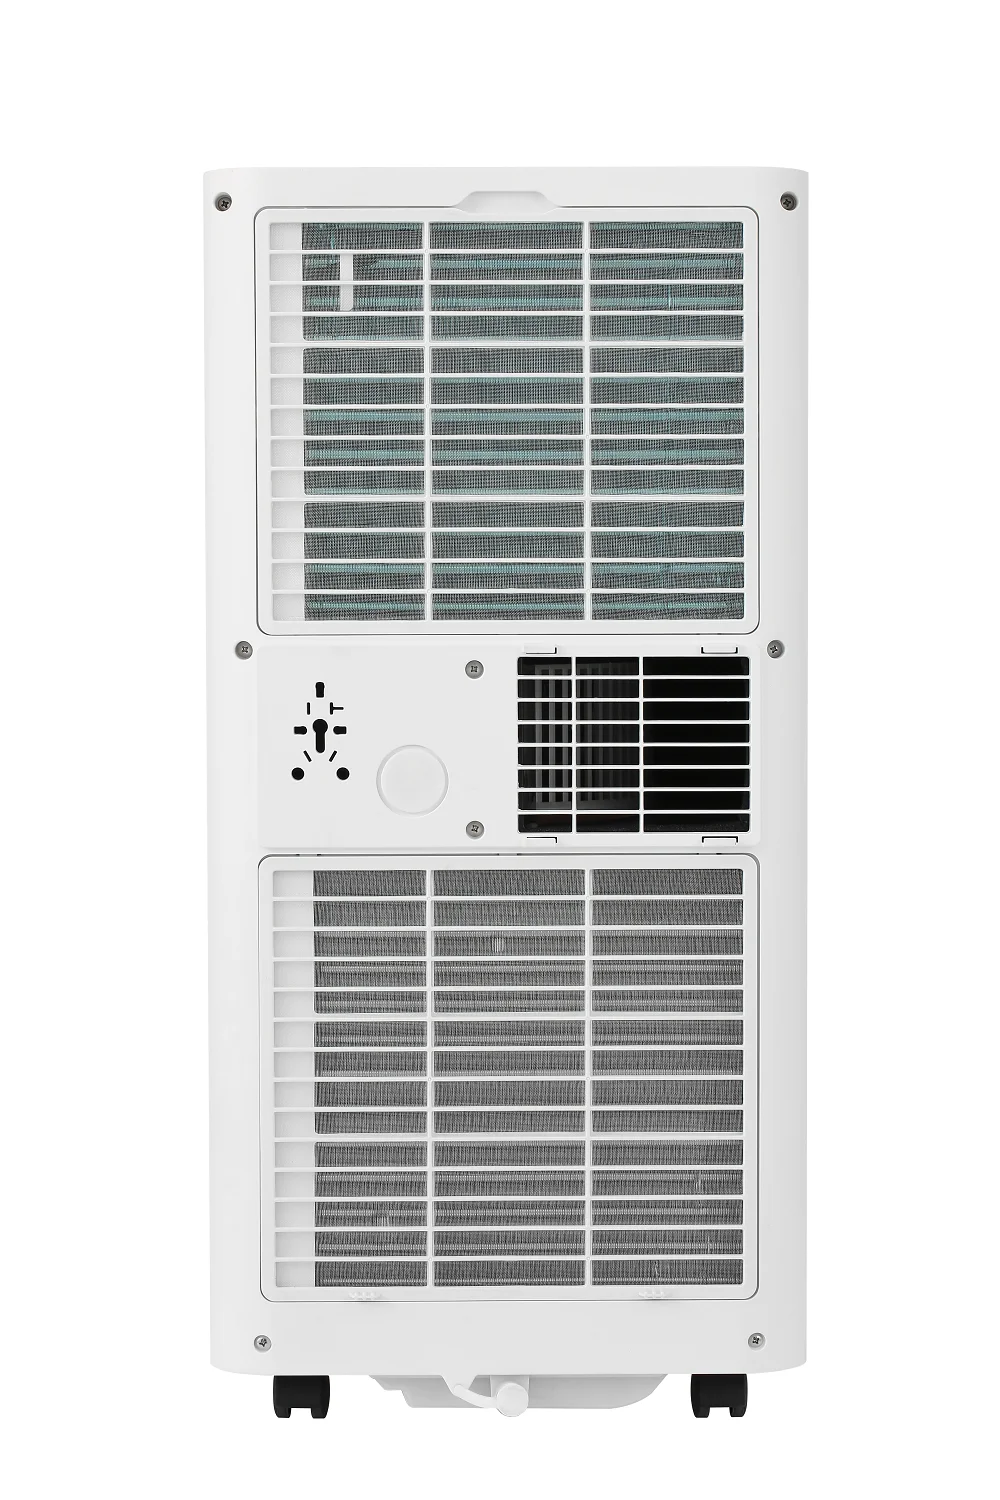 
2021 New Home Standing Air Conditioner Window Type Air Conditioner Portable Air Conditioners 